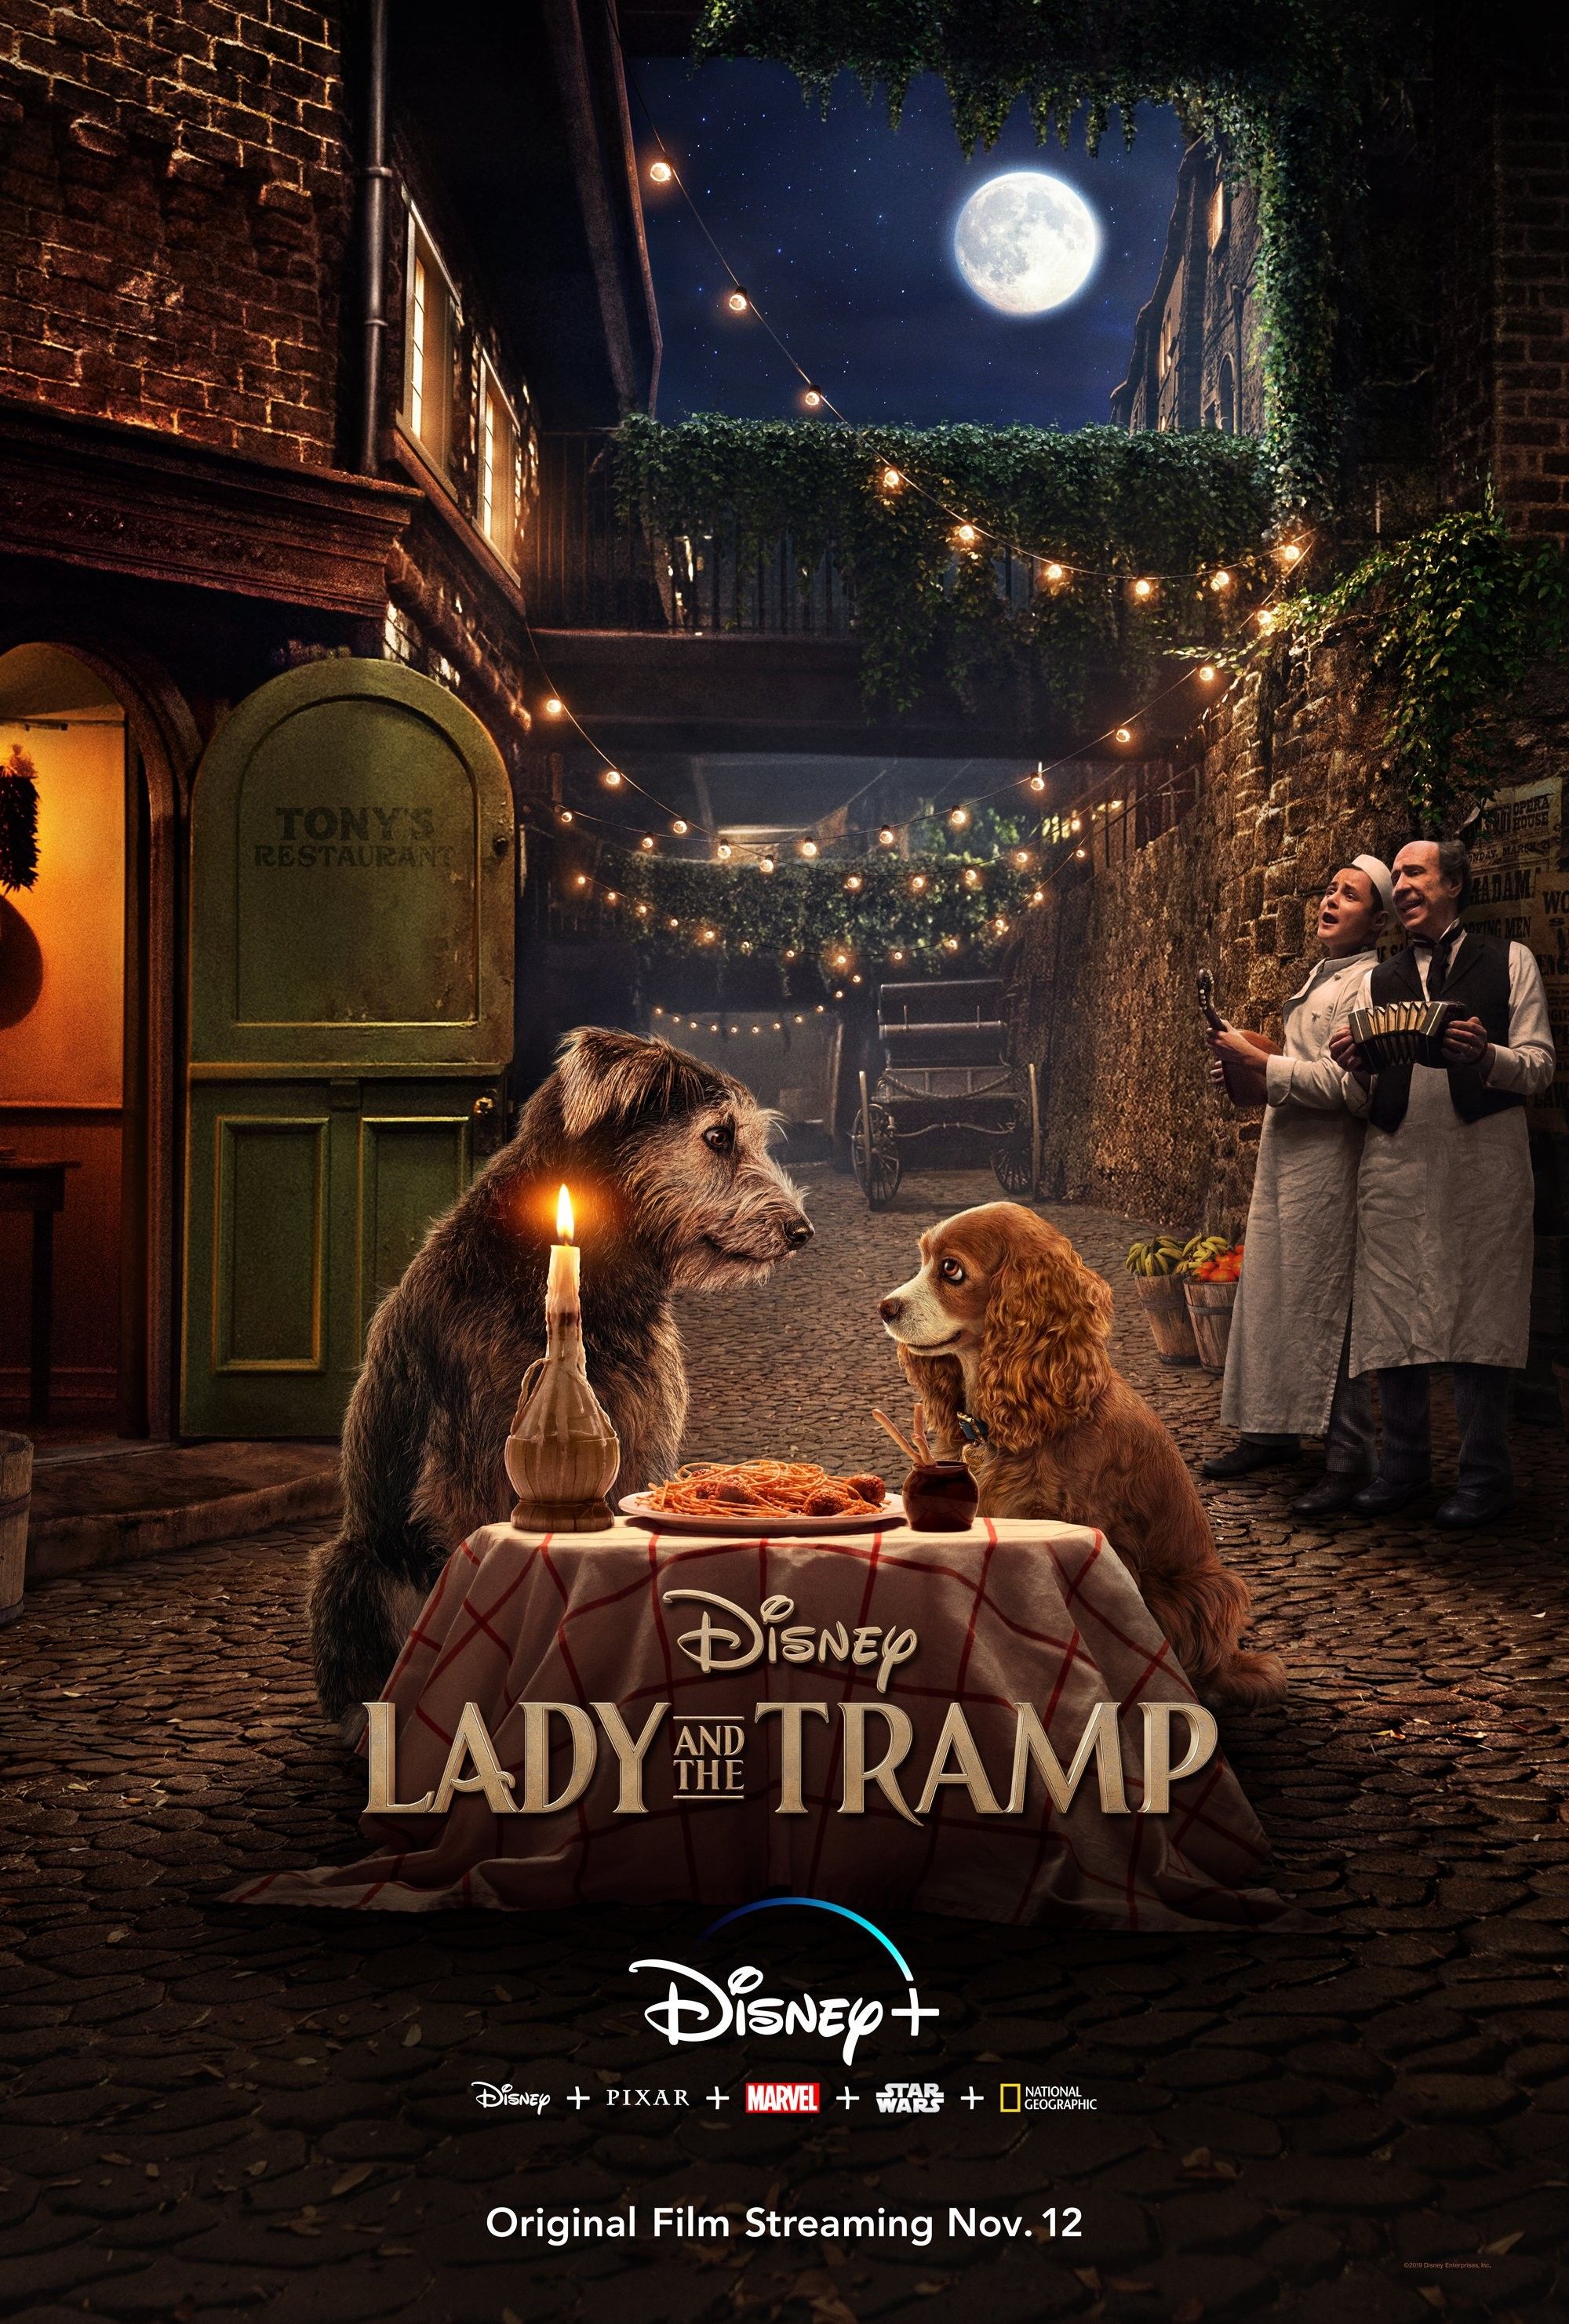 Lady and the Tramp Live-Action Remake Trailer & Poster Are Here!